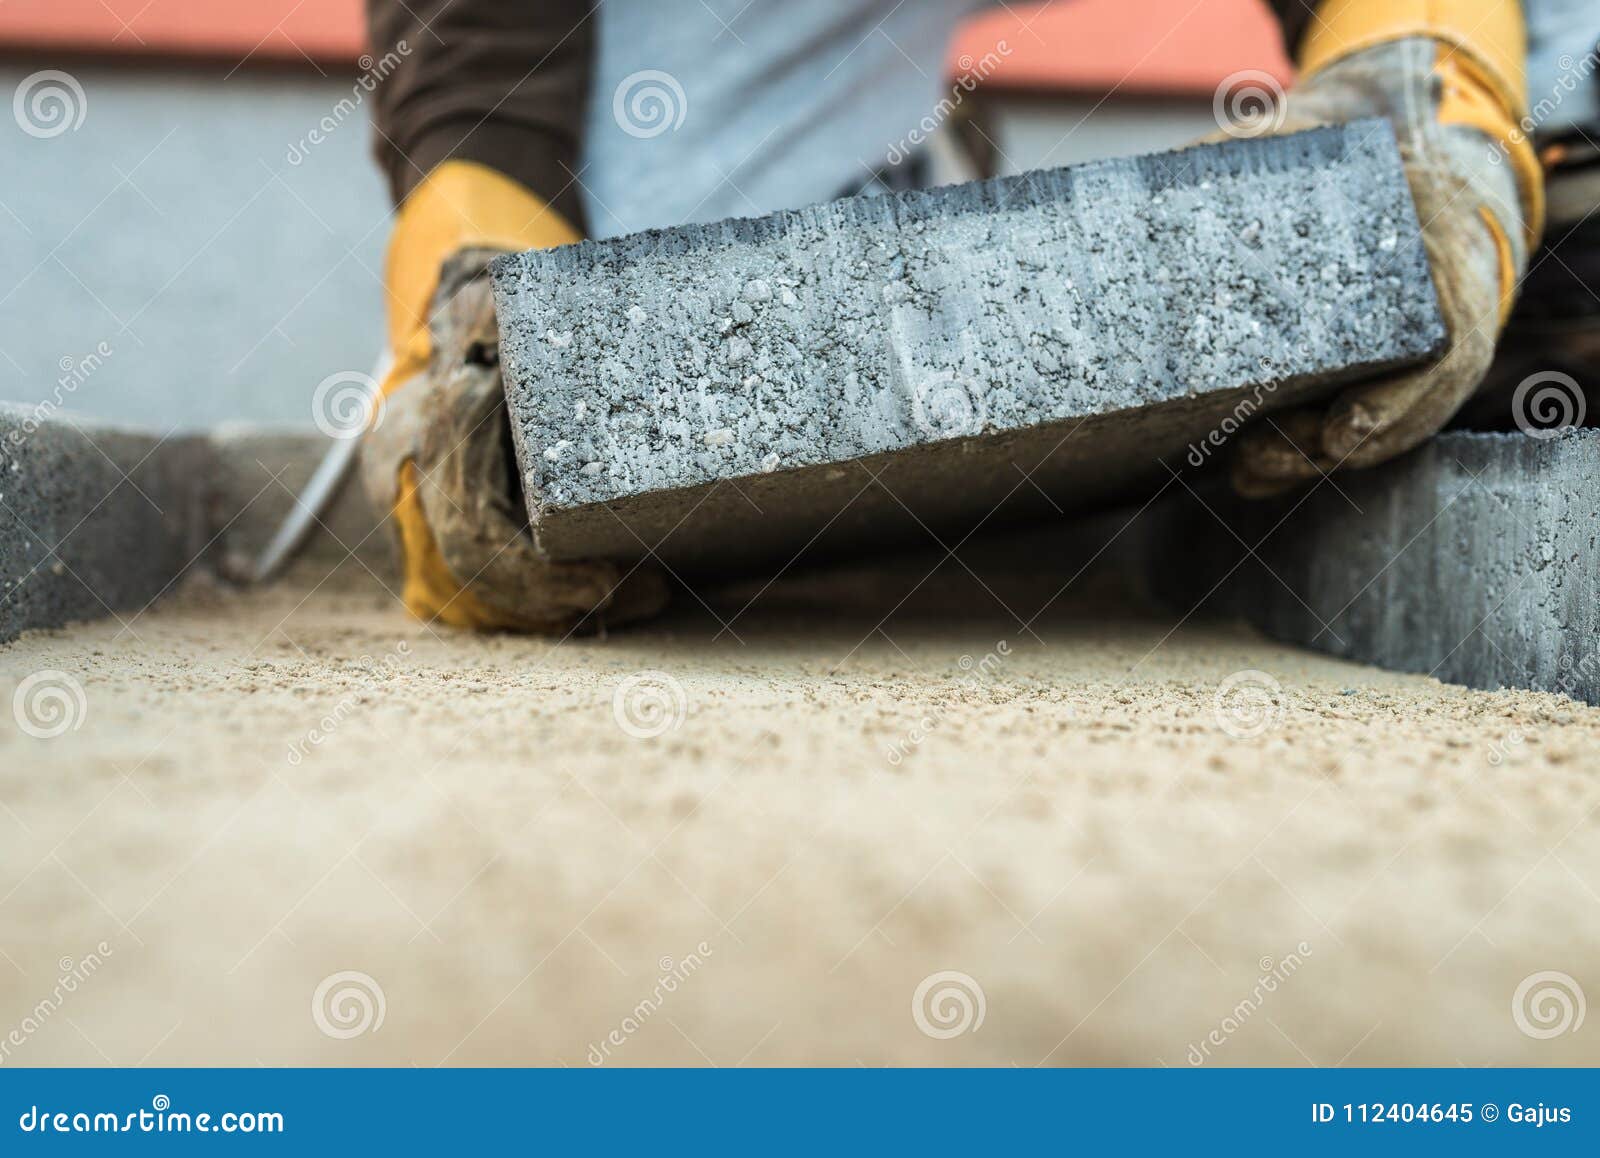 builder laying a paving brick placing it on the sand foundation